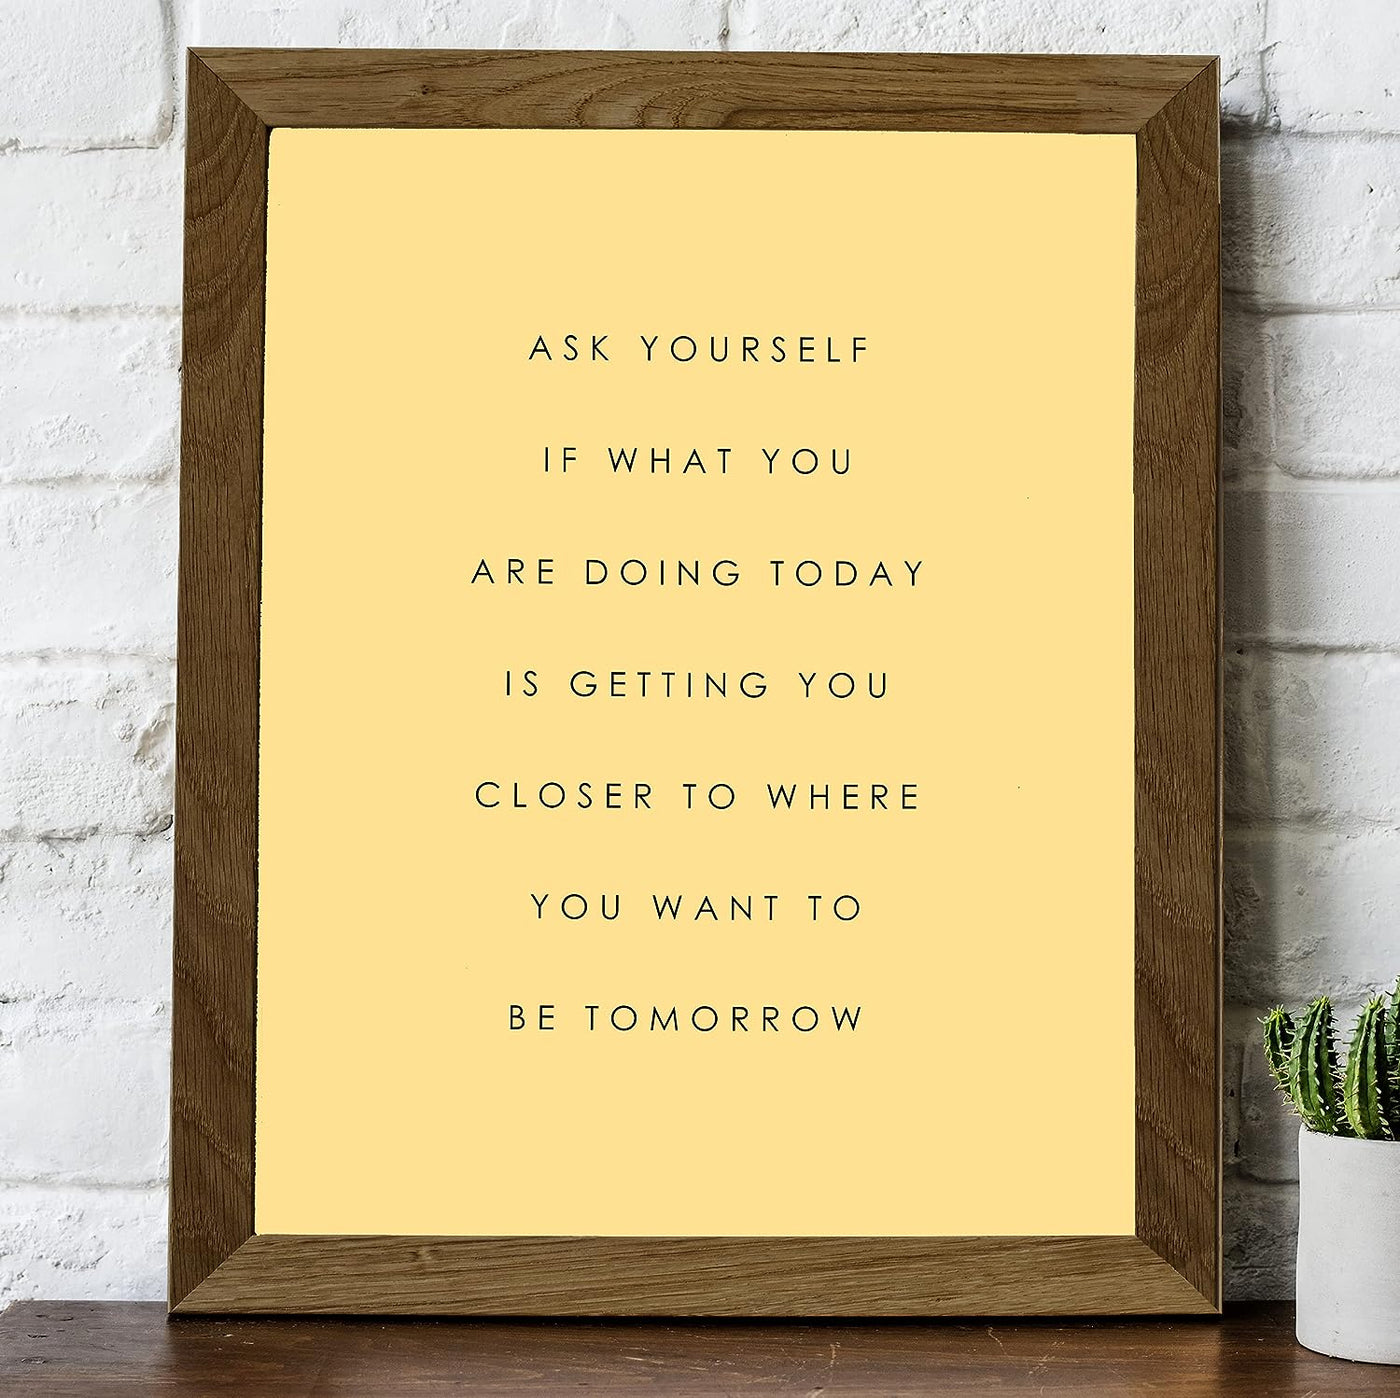 Ask Yourself-What Is Getting You Closer Motivational Quotes Wall Decor -8 x 10" Inspirational Art Print-Ready to Frame. Modern Home-Office-Classroom-Dorm Decor. Great Positive Sign for Motivation!